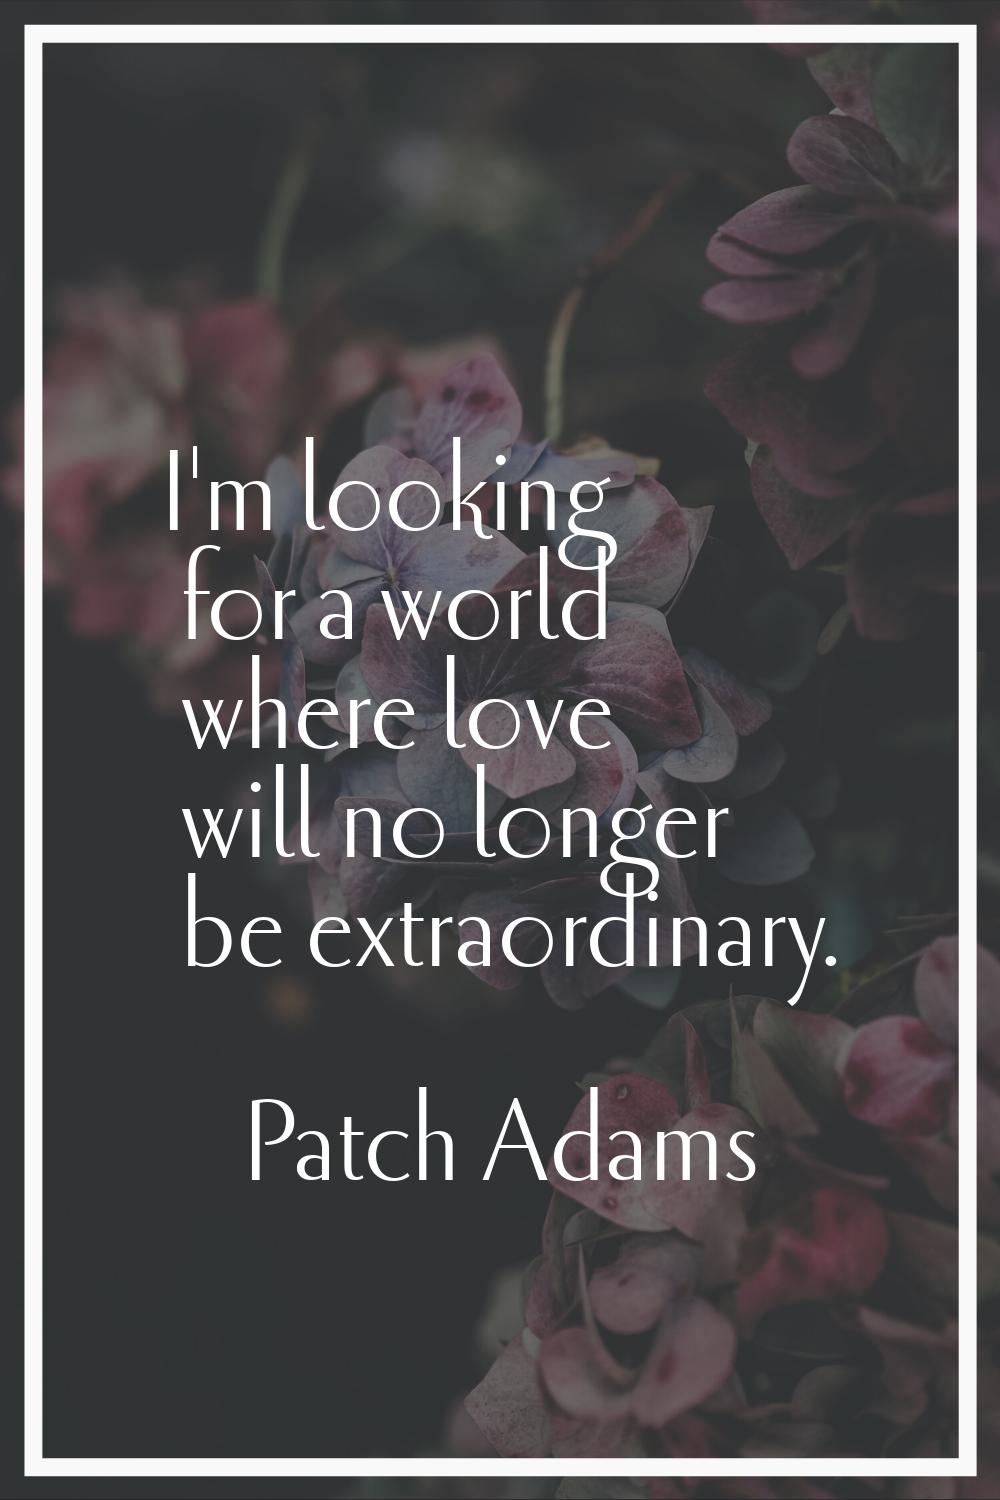 I'm looking for a world where love will no longer be extraordinary.